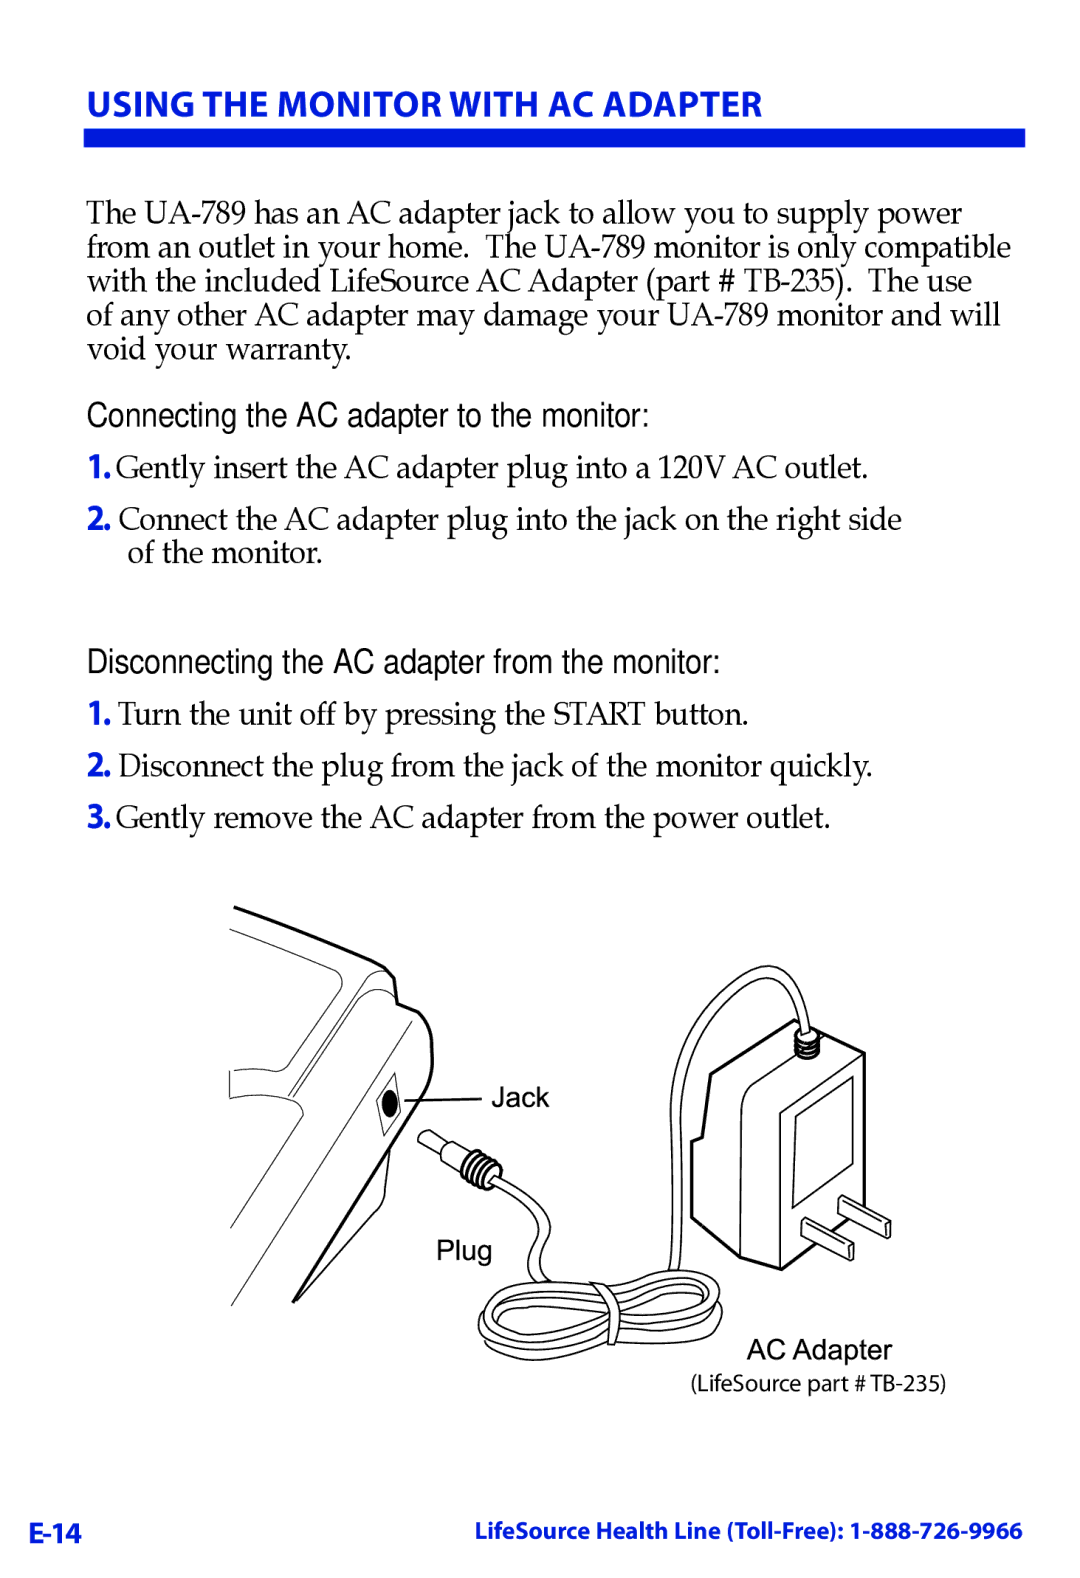 LifeSource UA-789 manual Using the Monitor with AC Adapter, Connecting the AC adapter to the monitor 